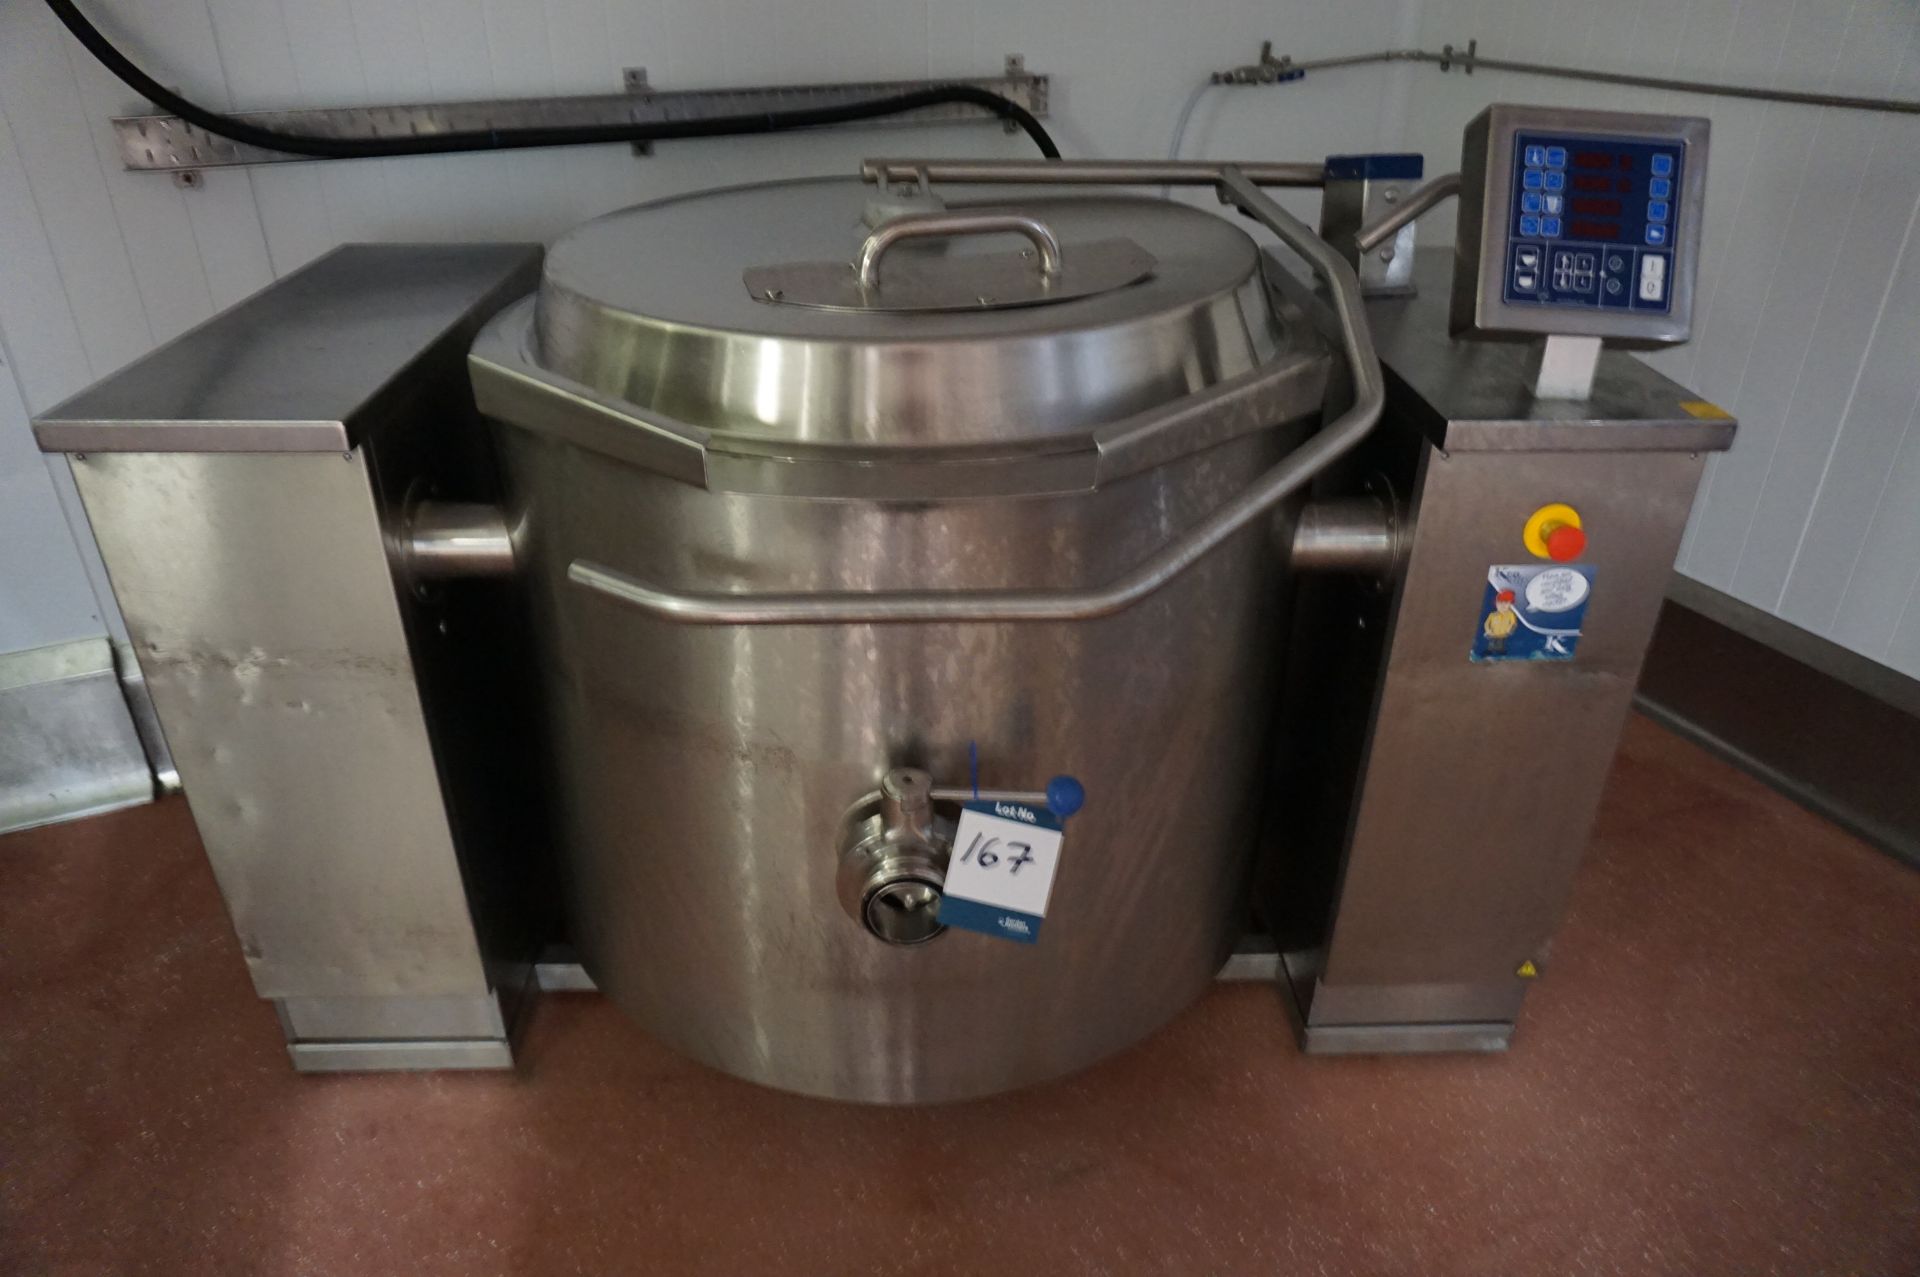 Kettle, Model: Multimix, 300L cook/chill vat with tilting function, Serial No. 016293-2638 (2016)